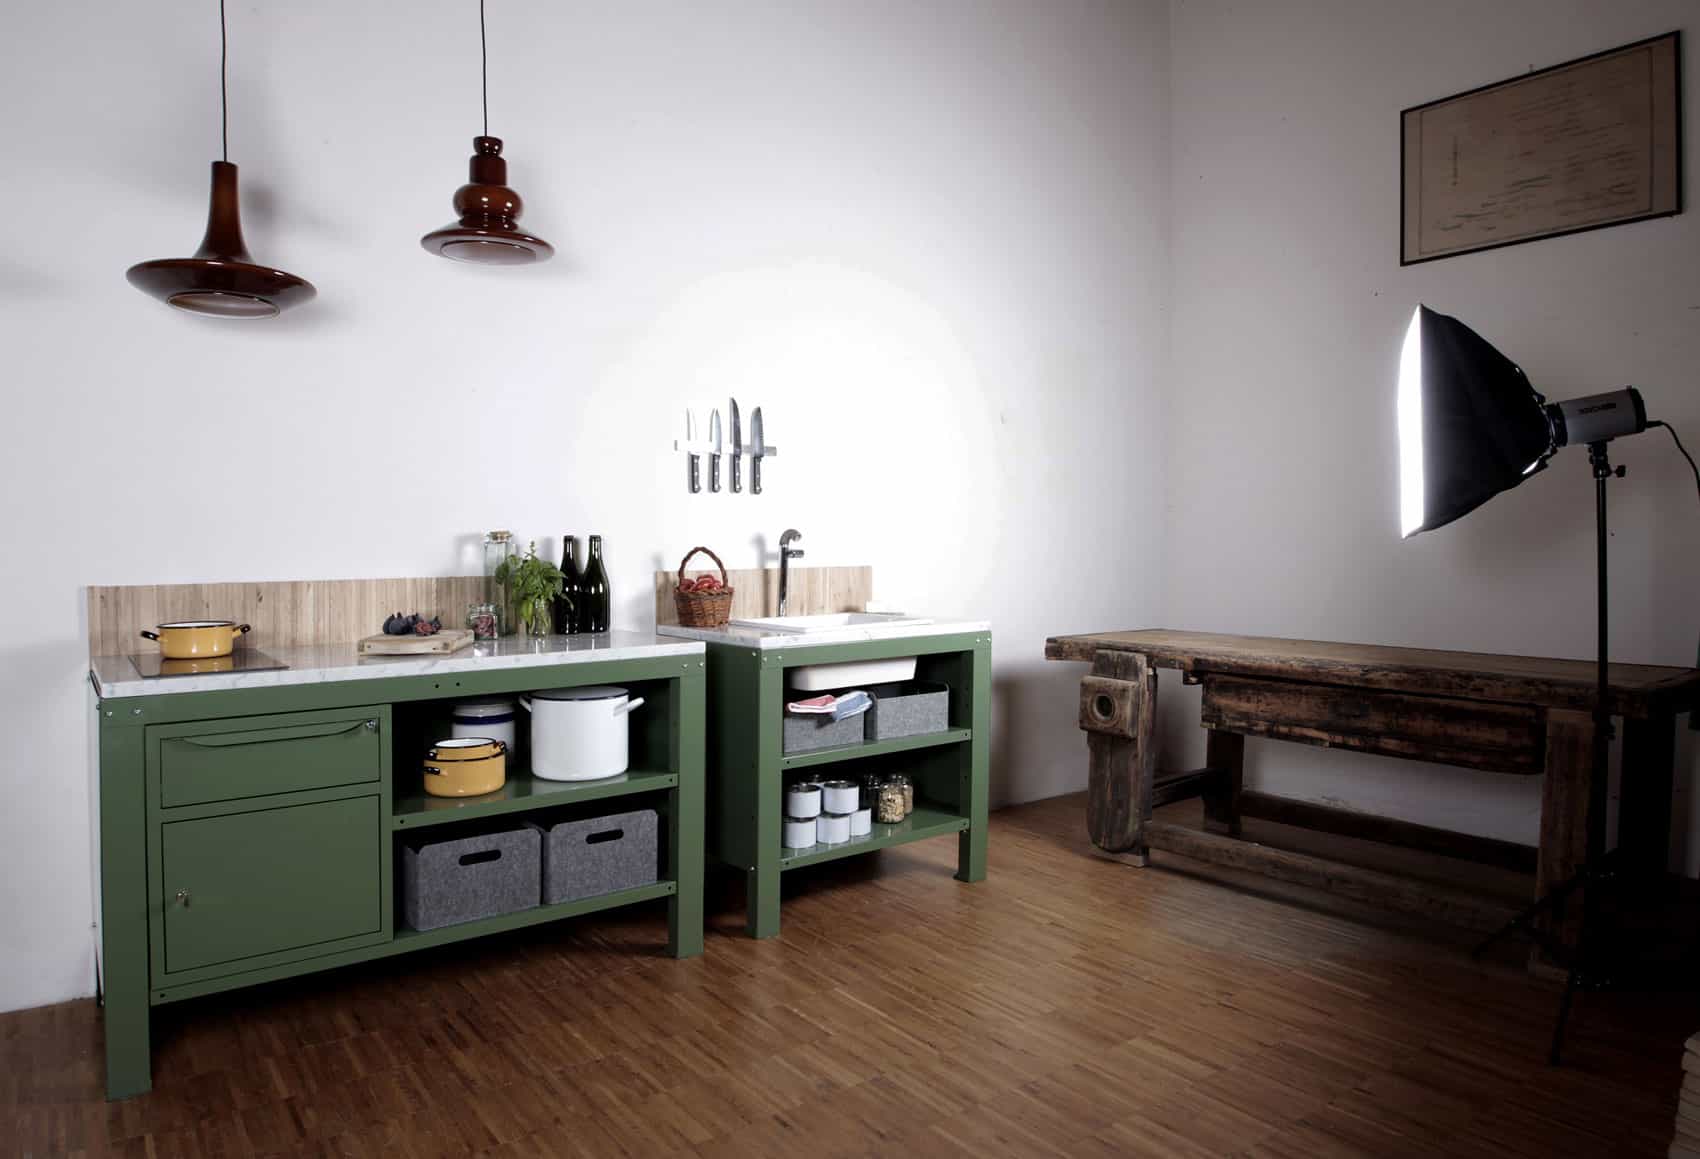 very simple kitchen